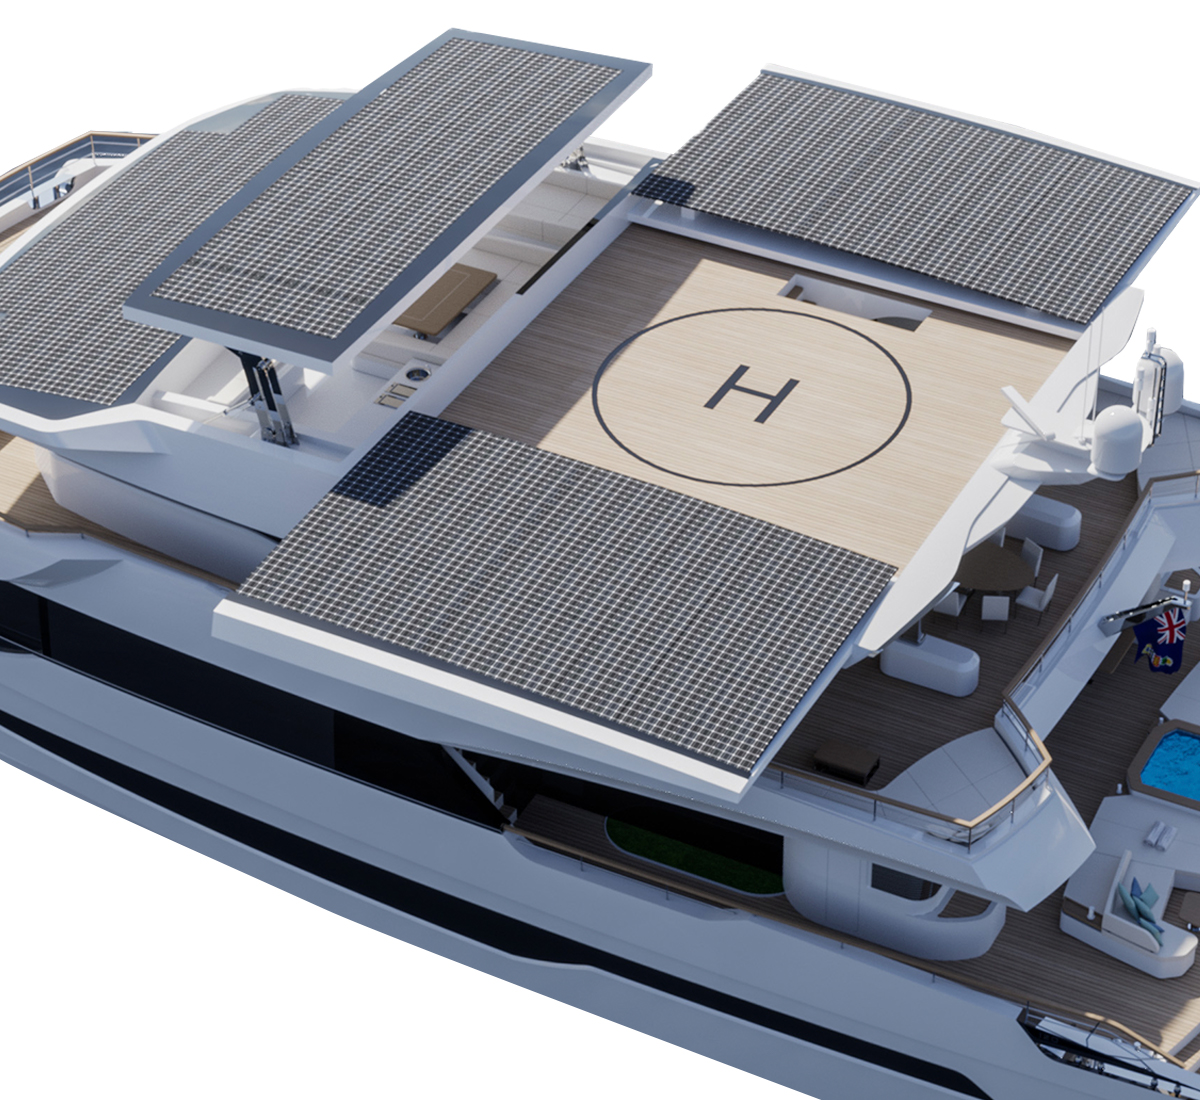 Helipad of a catamaran with solar panels in the roof